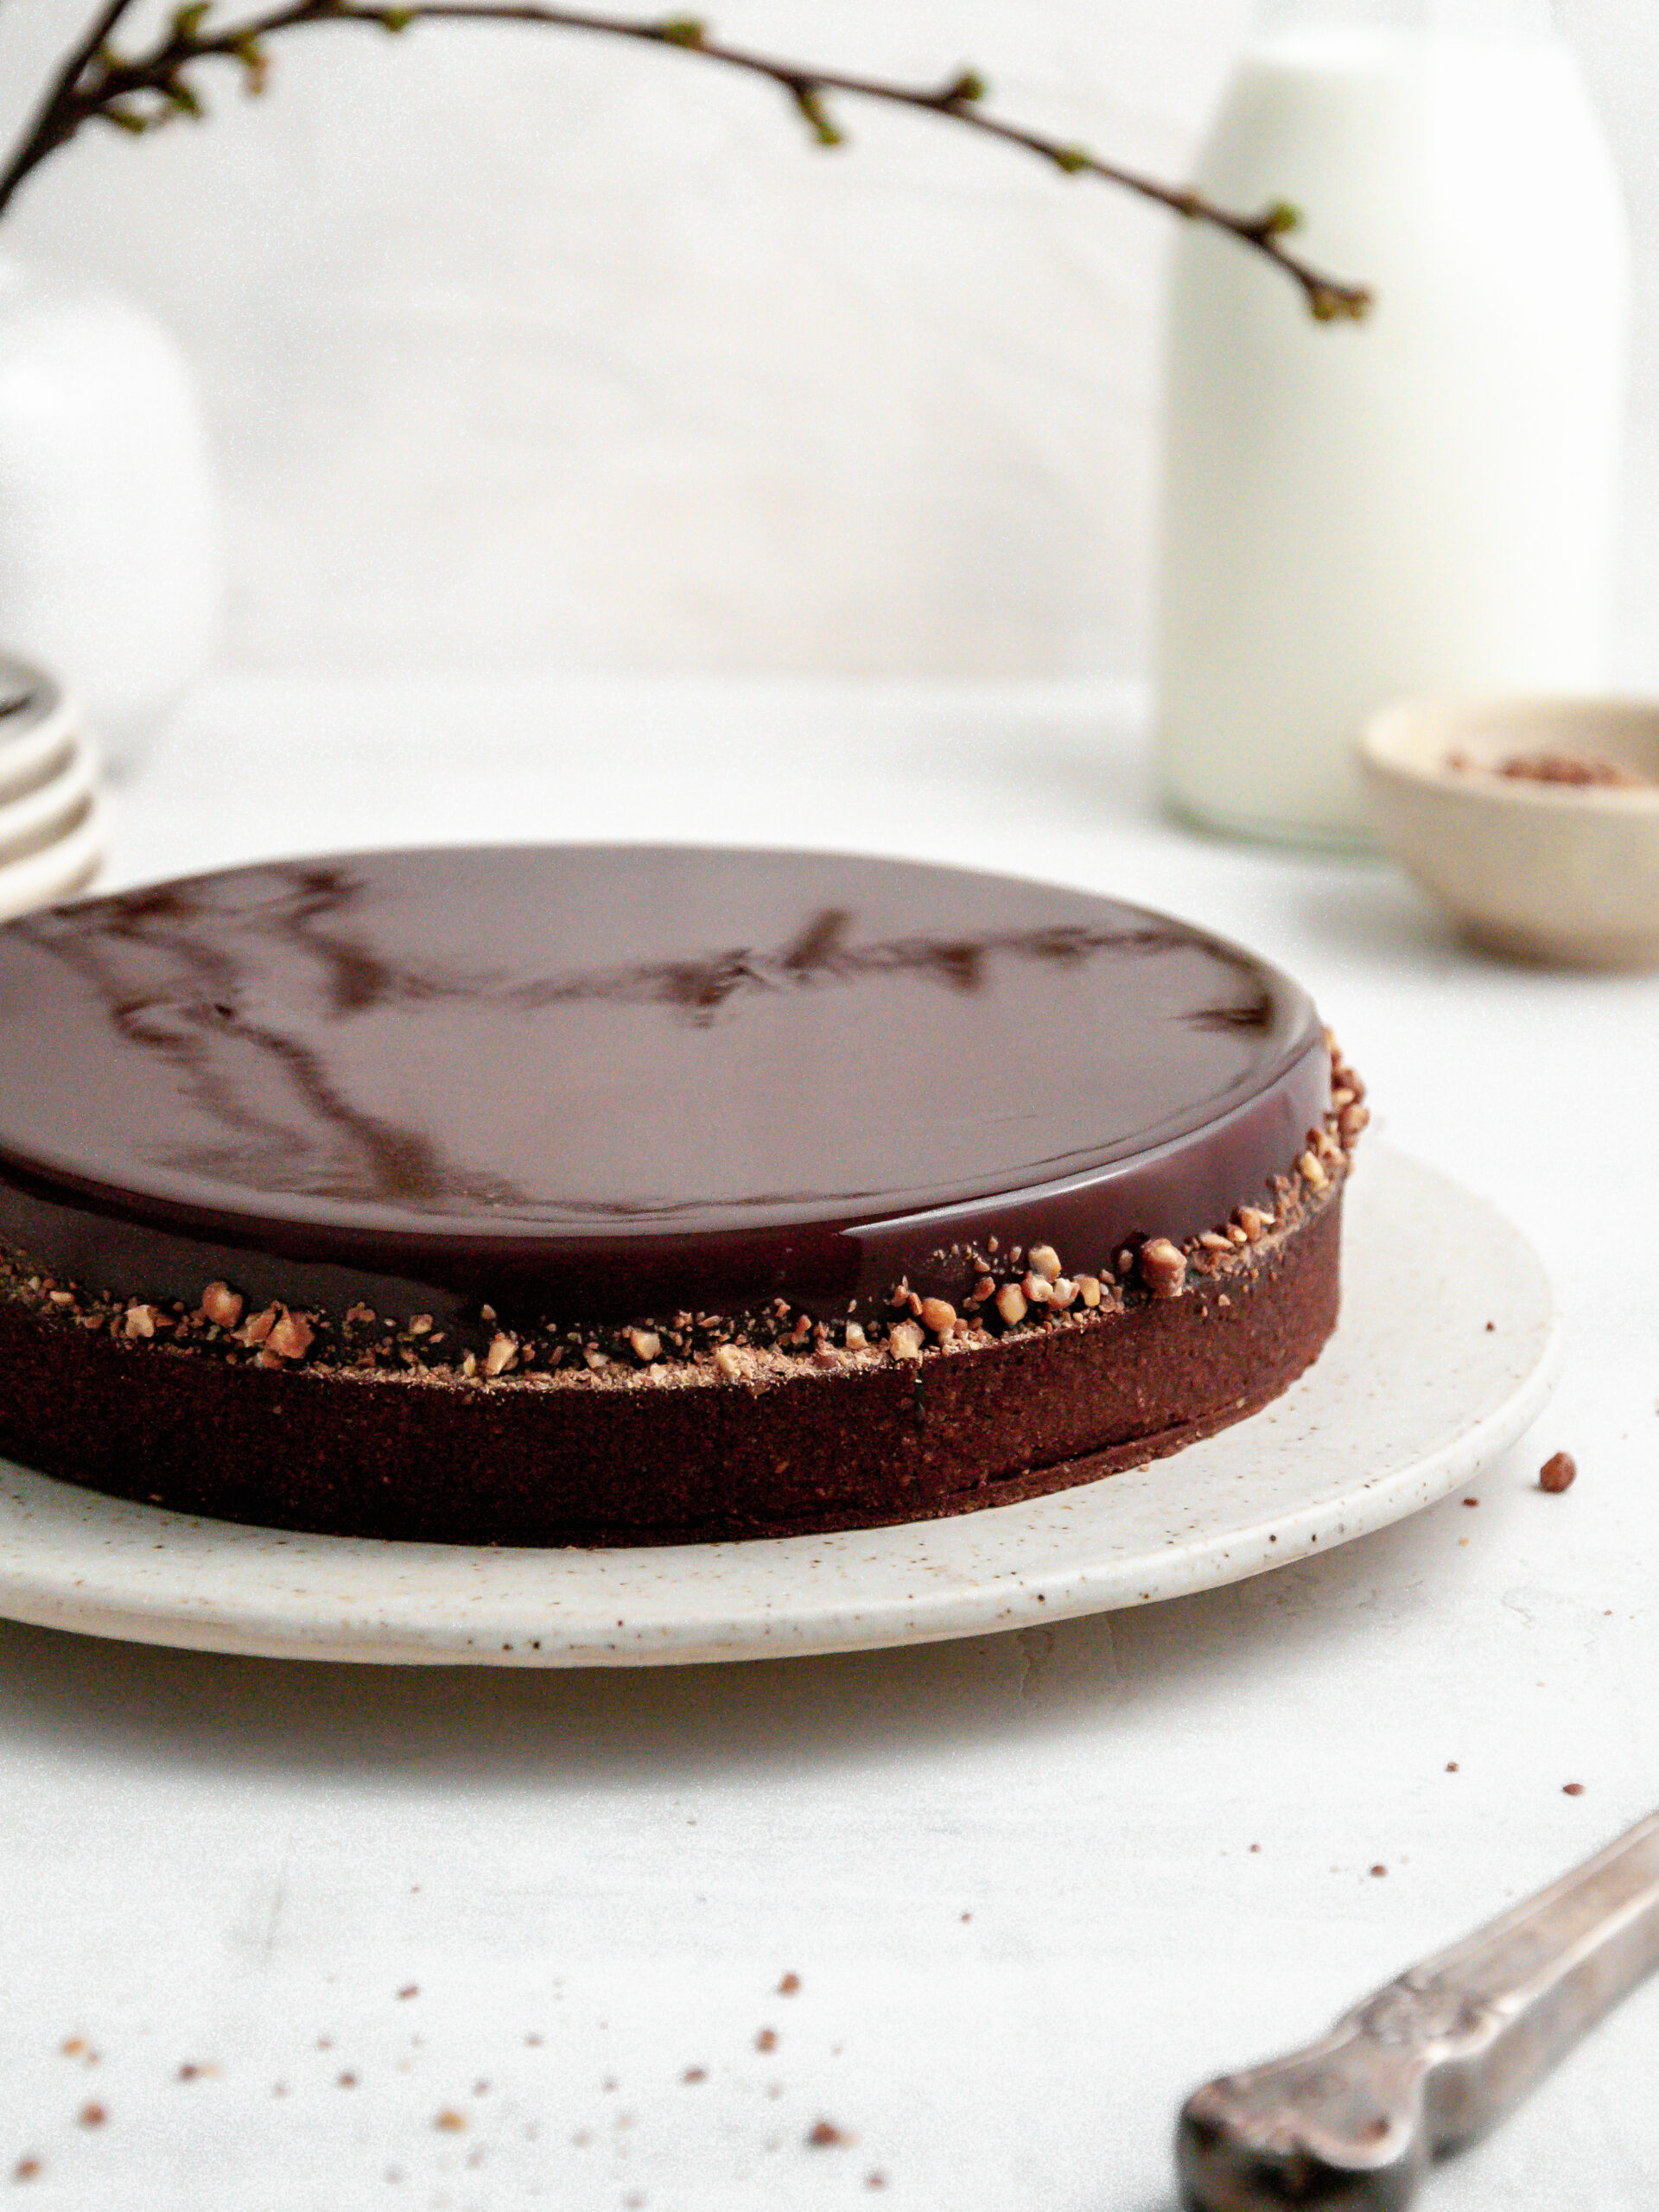 Chocolate Coffee and Caramel Tart on a cake stand.